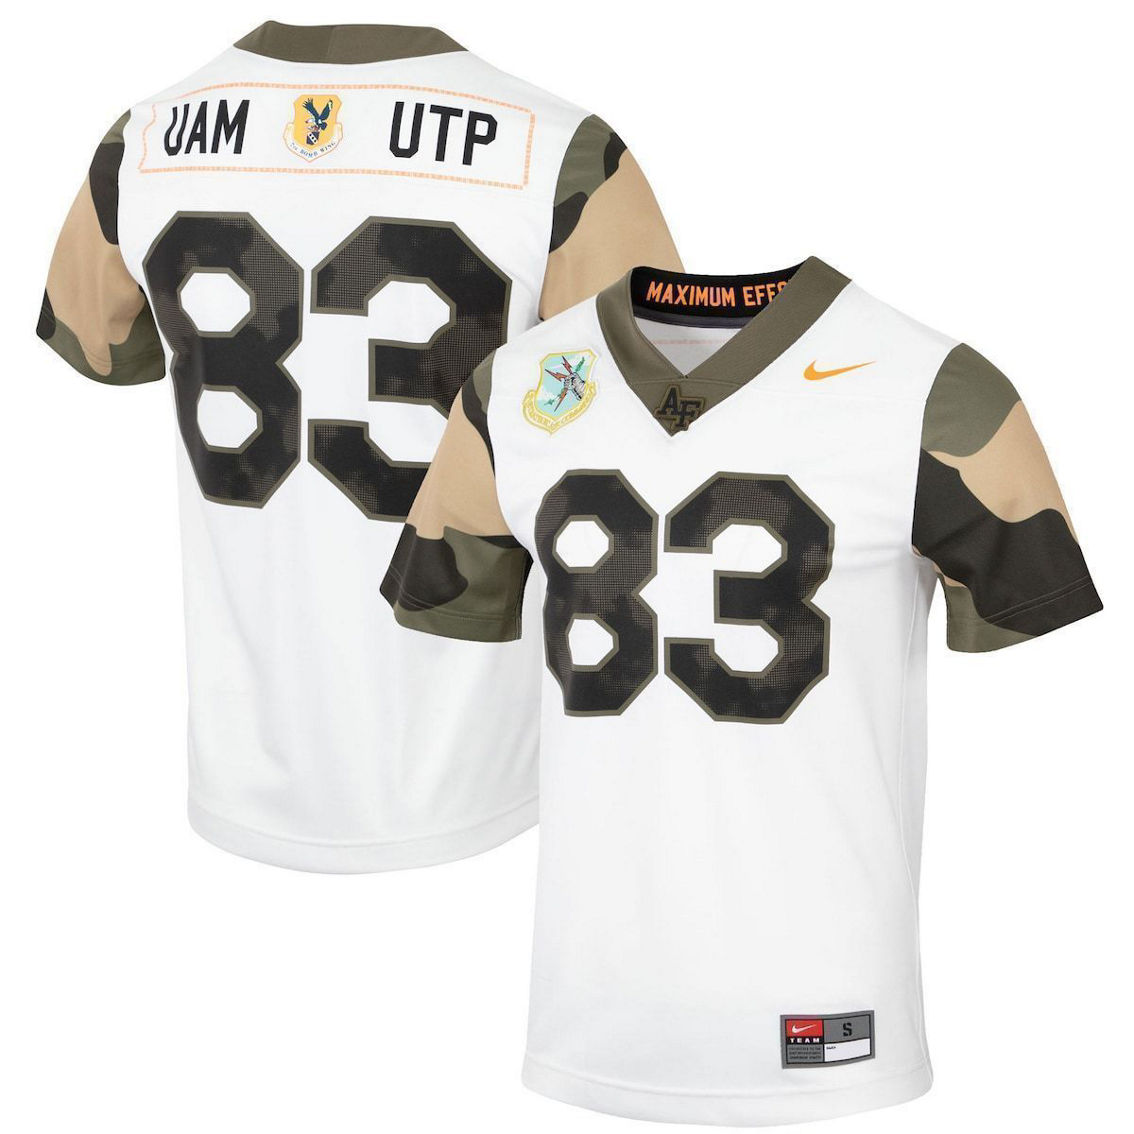 Nike Men's #83 White Air Force Falcons Special Game Replica Jersey - Image 2 of 4